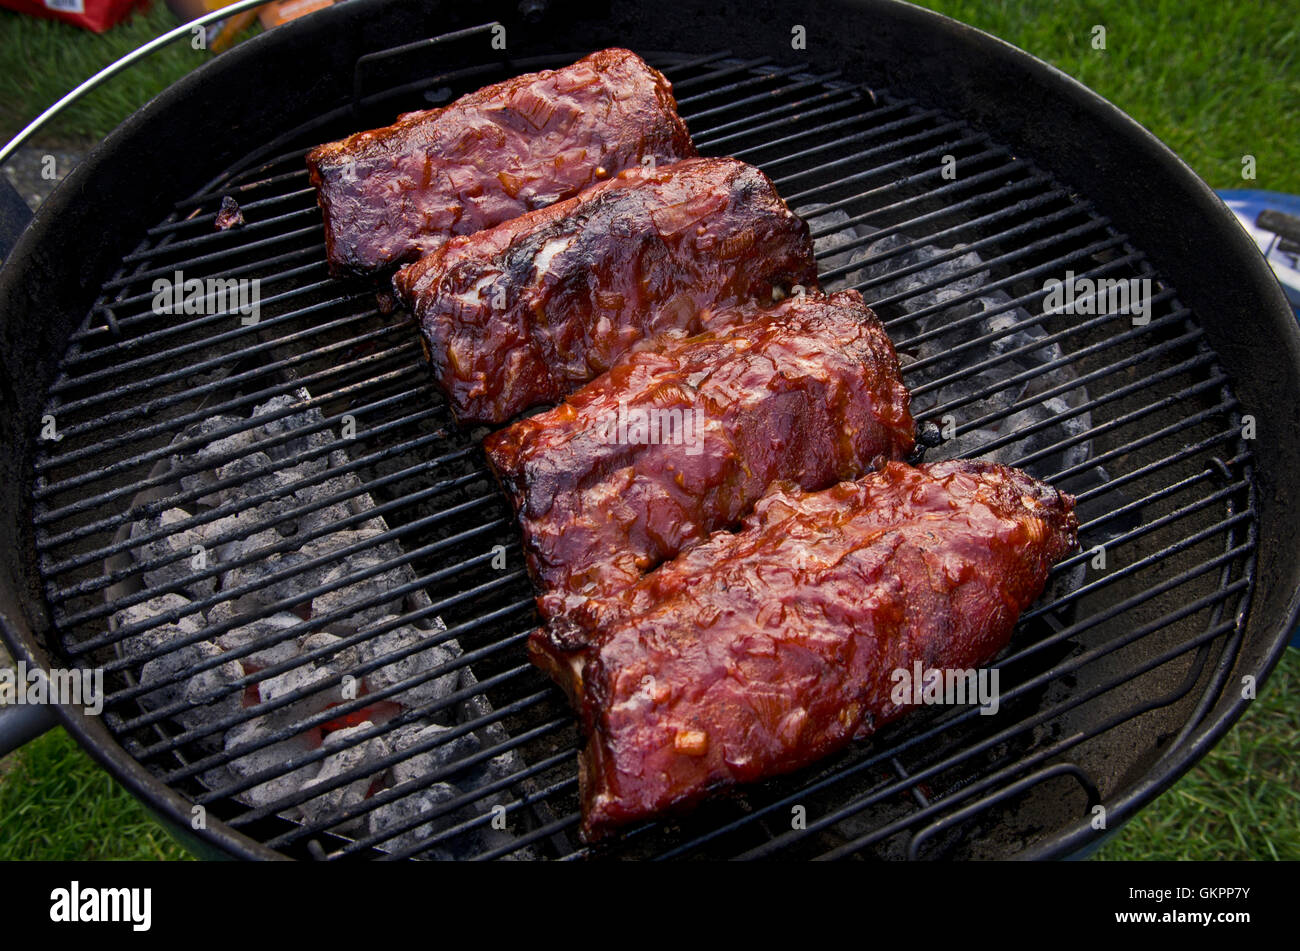 Pork baby back ribs  on a charcoal barbecue Stock Photo